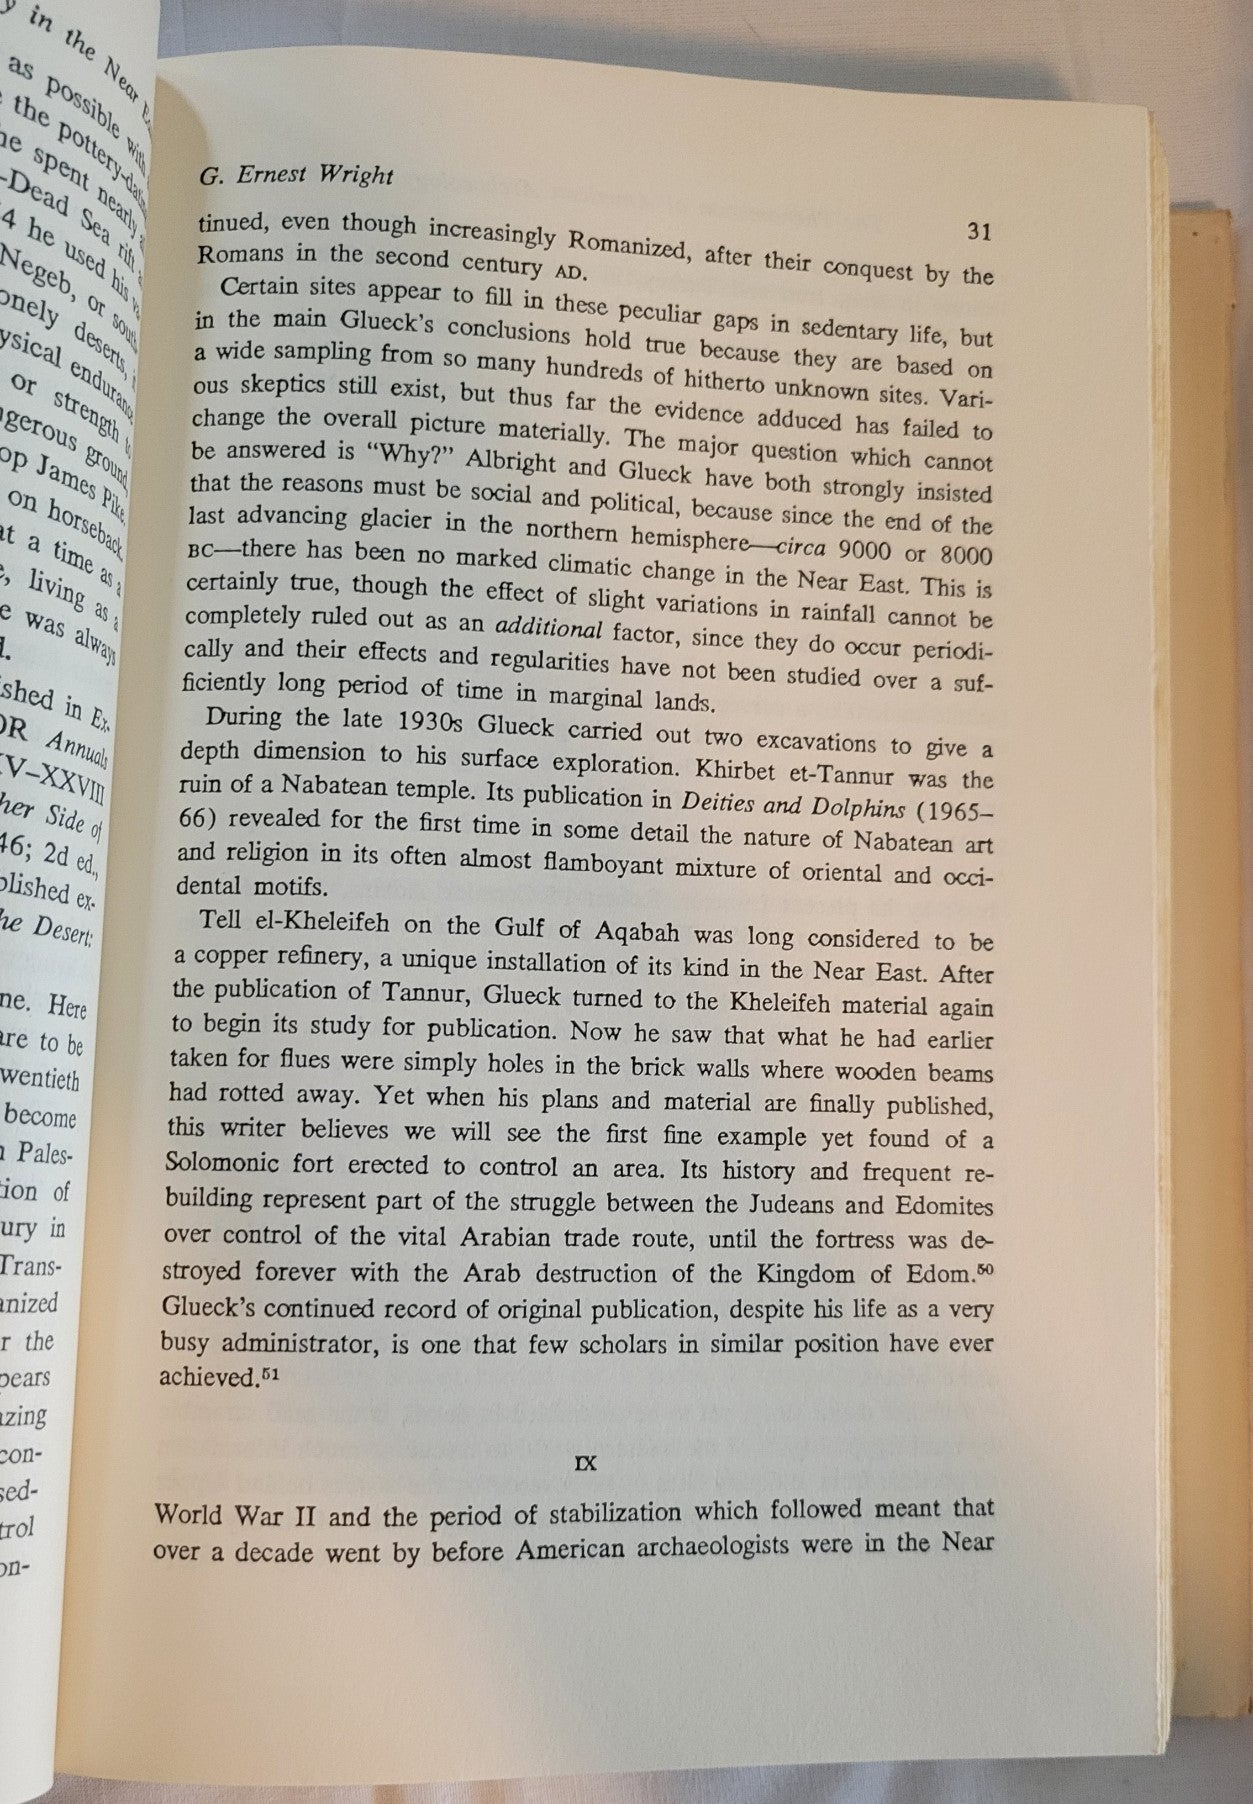 Used book for sale, “Near Eastern Archaeology in the Twentieth Century” edited by James A. Sanders, written in honor of Nelson Glueck. View of page 31.